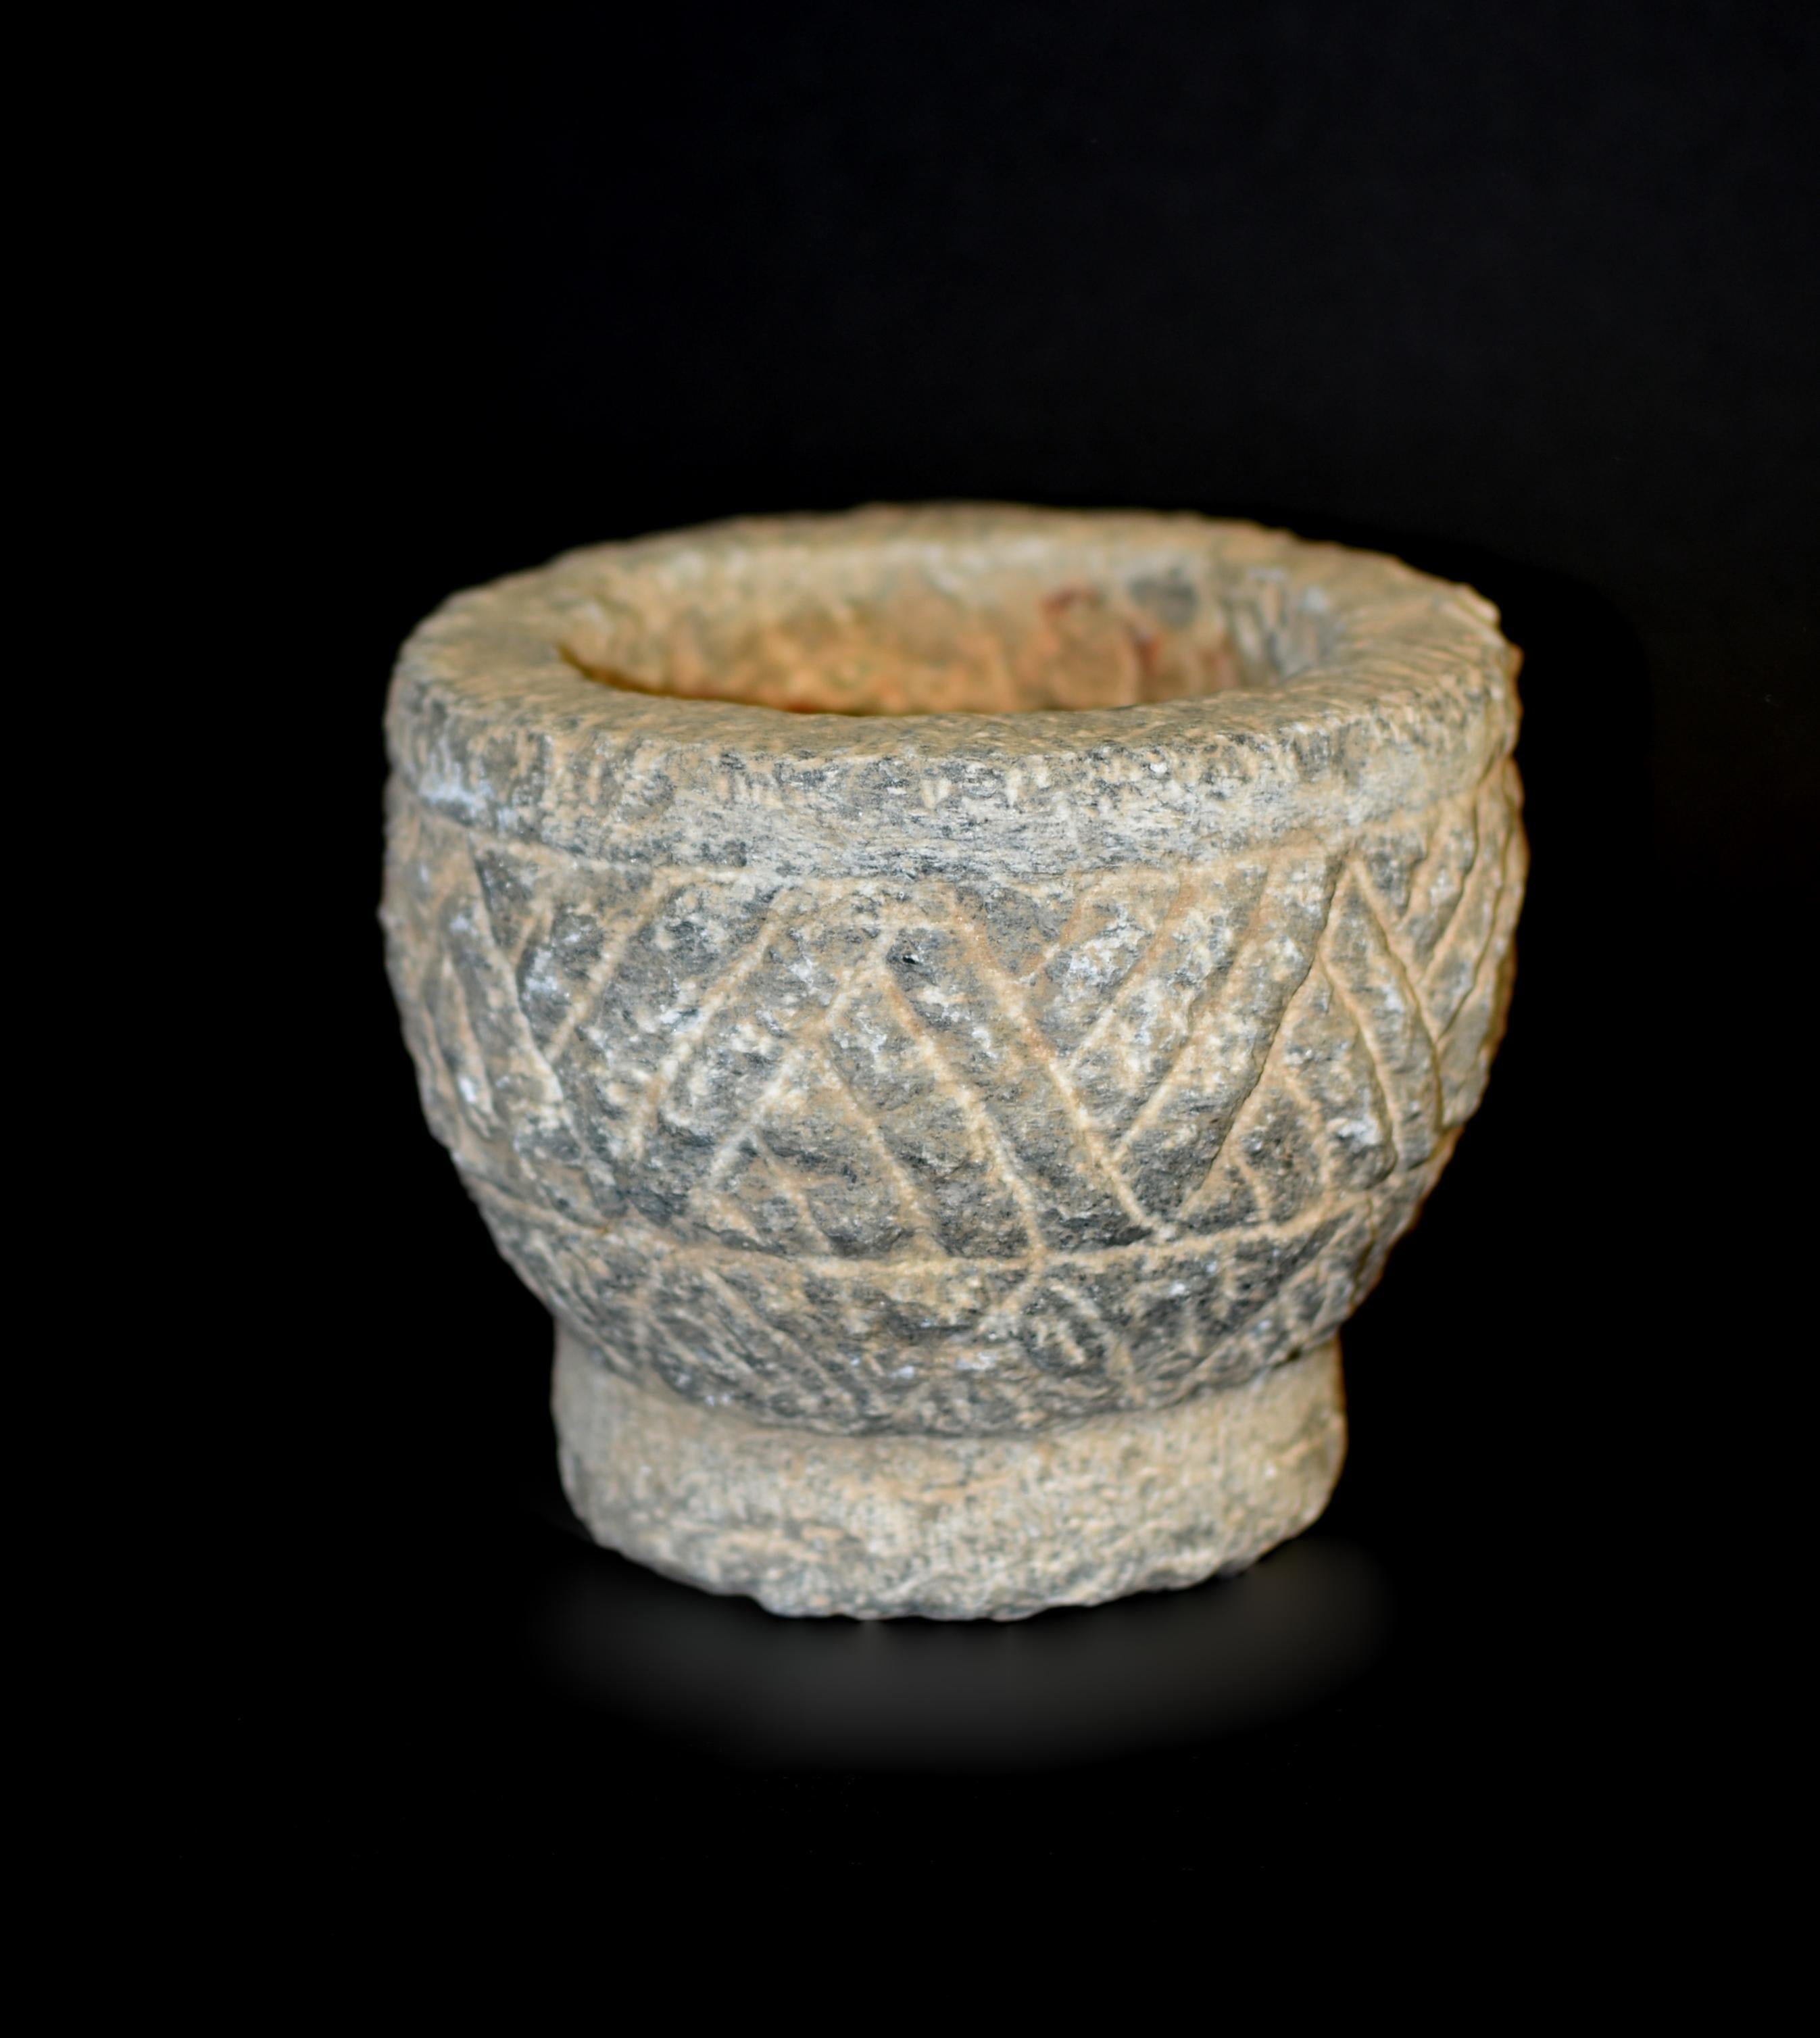 From Northern China a piece of great antiquity. The antique bowl of granite stone, hand cut and crafted, in conical form with a waisted base. Of white grey stone displaying natural patina and hand cut channeled grooves symbolizing prehistoric rice